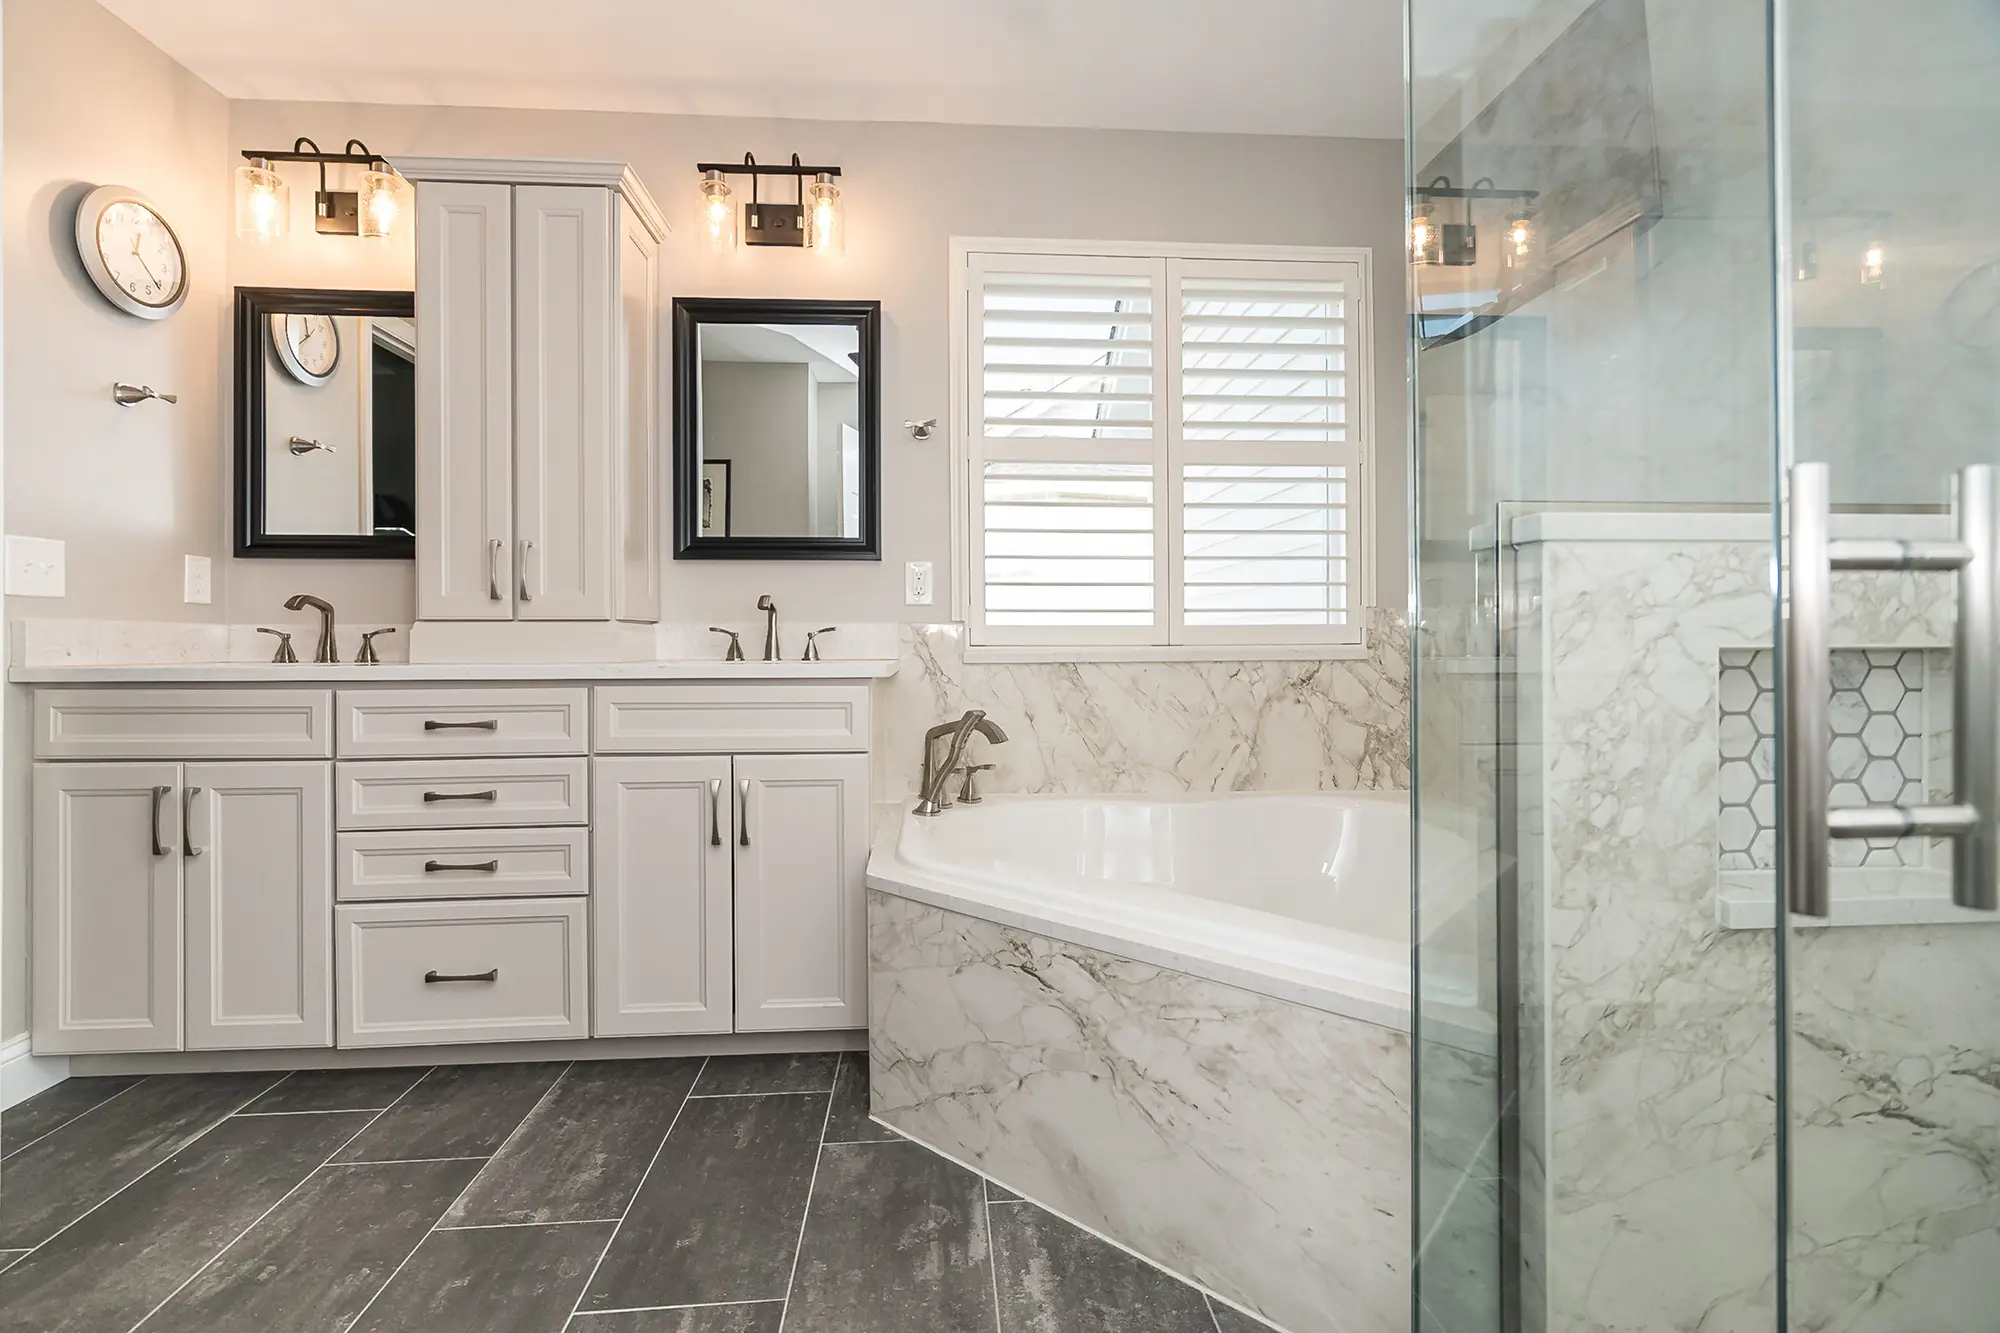 The 10 Best Accessories to Upscale Your Bathroom Remodel